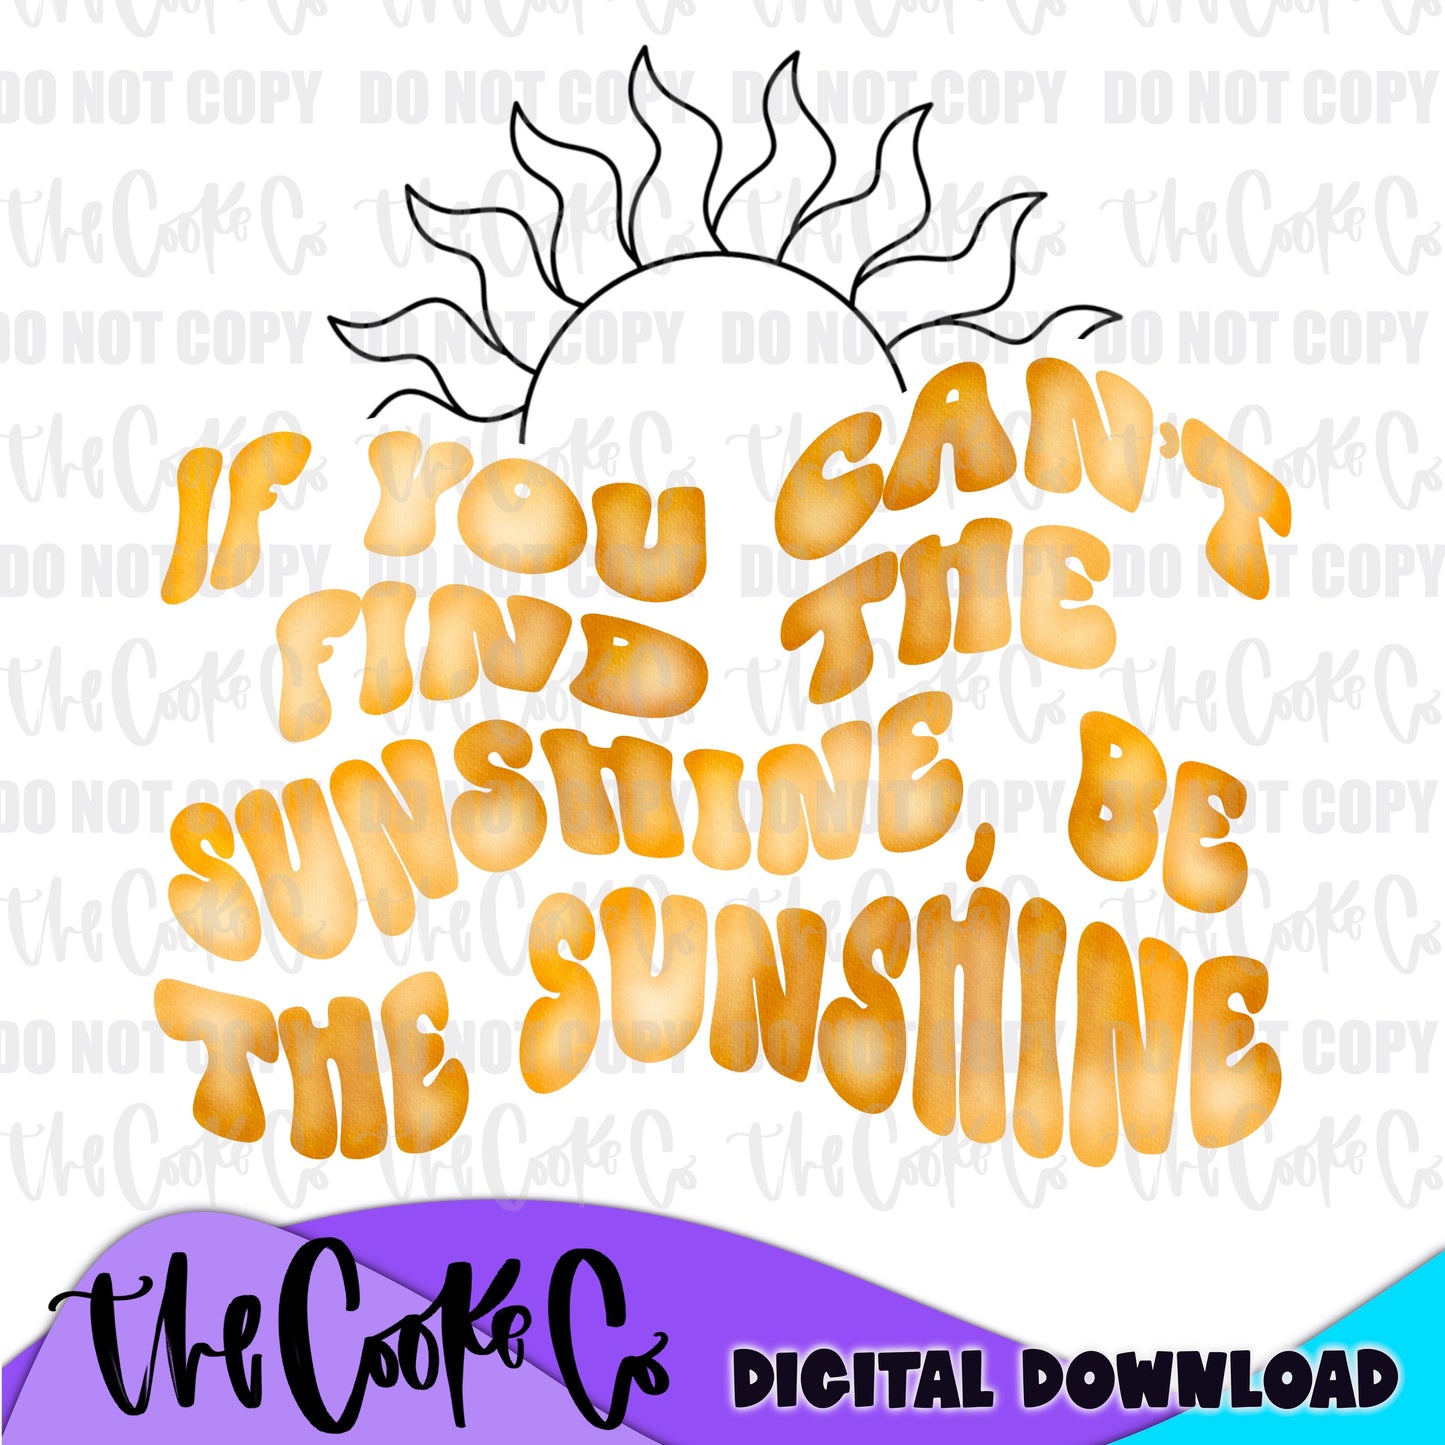 IF YOU CAN'T FIND THE SUNSHINE, BE THE SUNSHINE | Digital Download | PNG